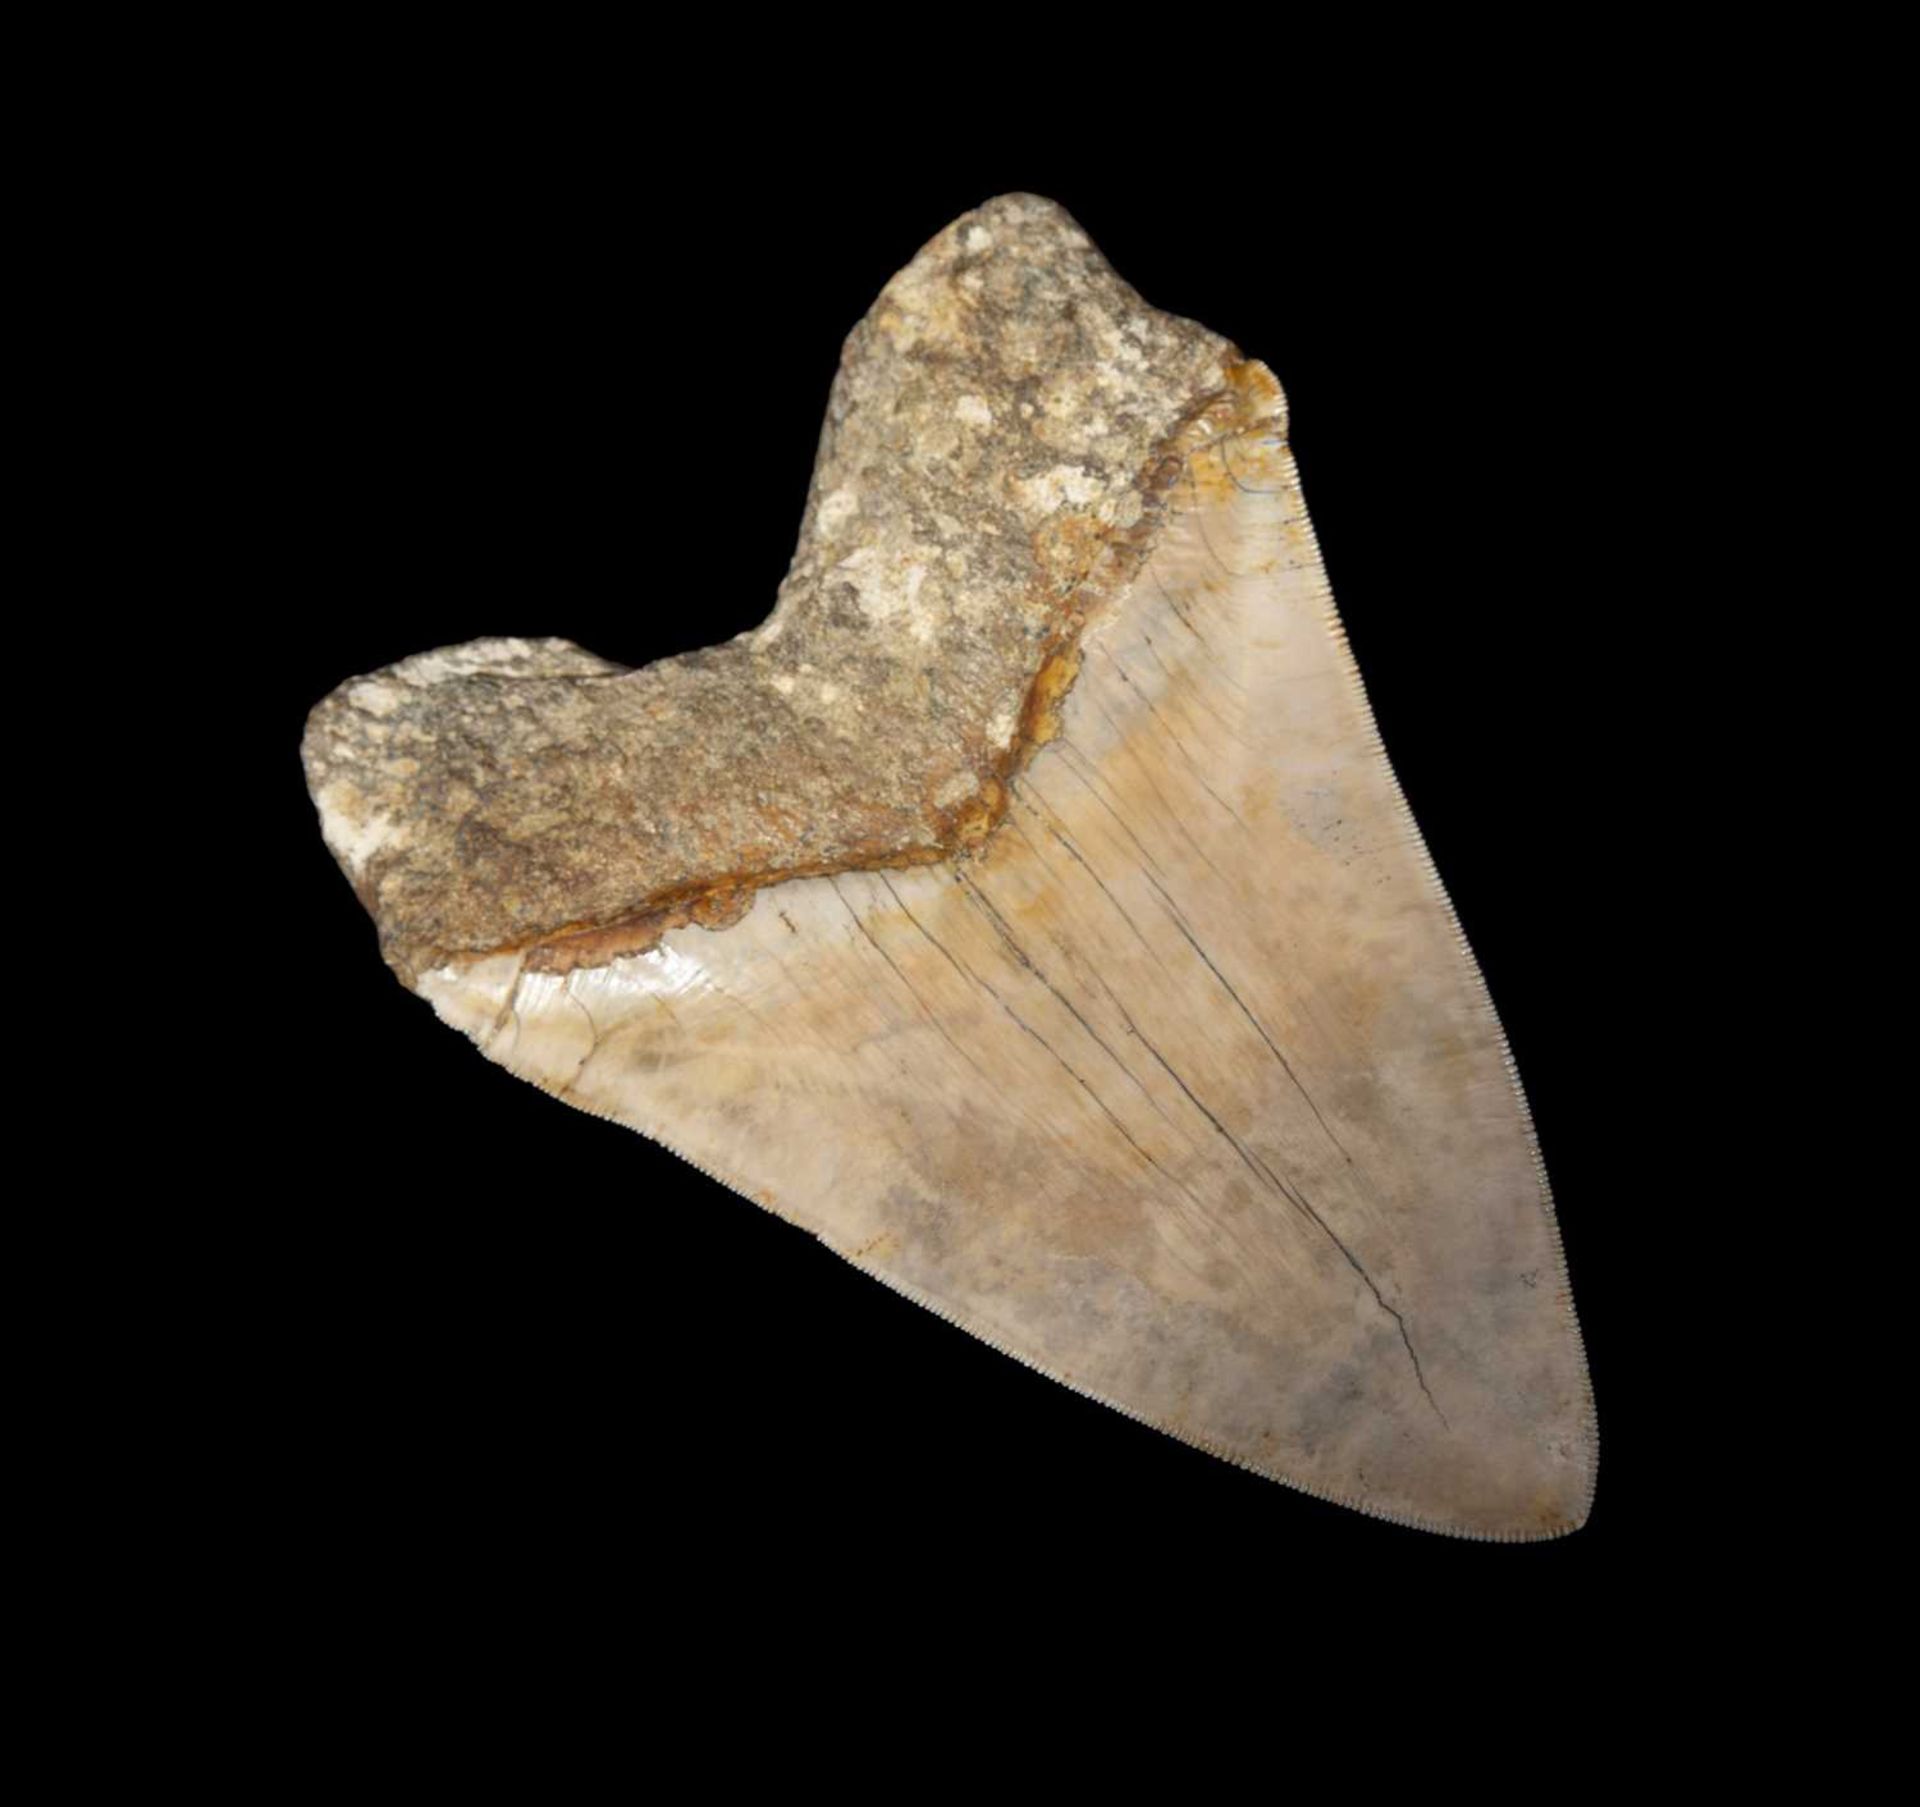 A LARGE FOSSILISED, EXTINCT MEGALODON SHARK TOOTH - Image 6 of 6